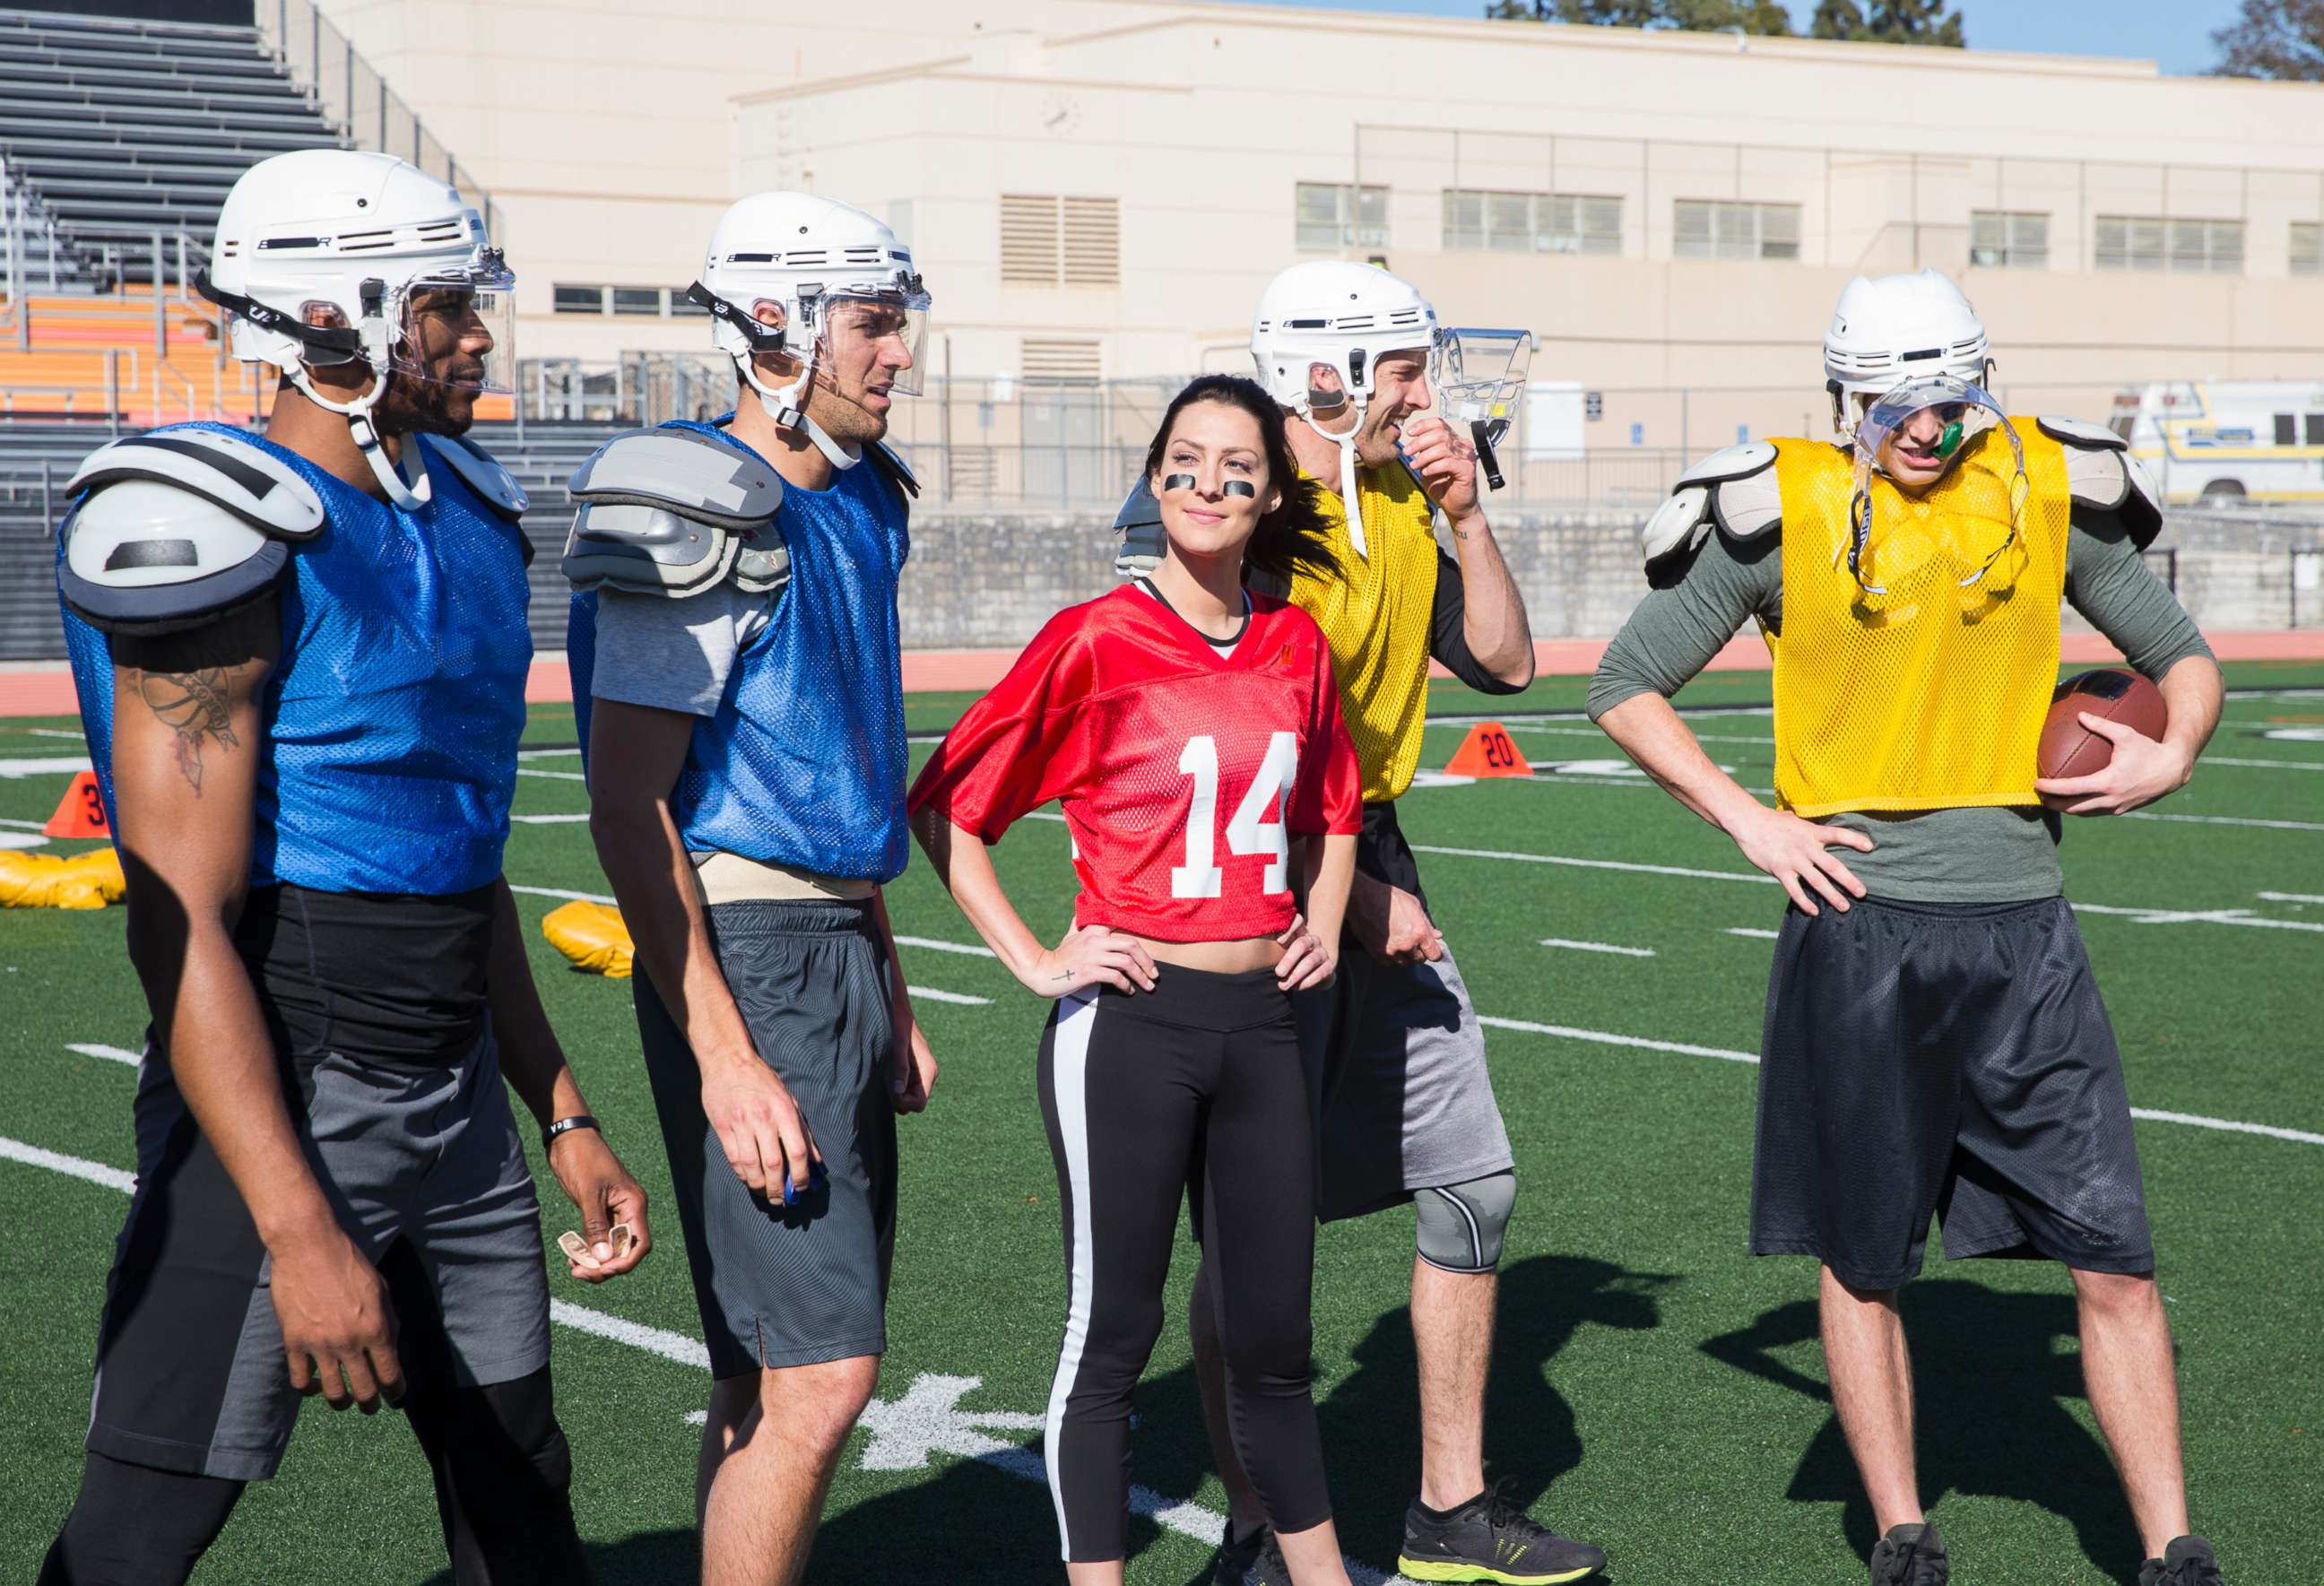 PHOTO: Christon, Ryan, Garrett and Blake meet Becca Kufrin at a football field to run drills with professional Legends Football League stars and then play a lively game, on "The Bachelorette," June 11, 2018, on The ABC Television Network.